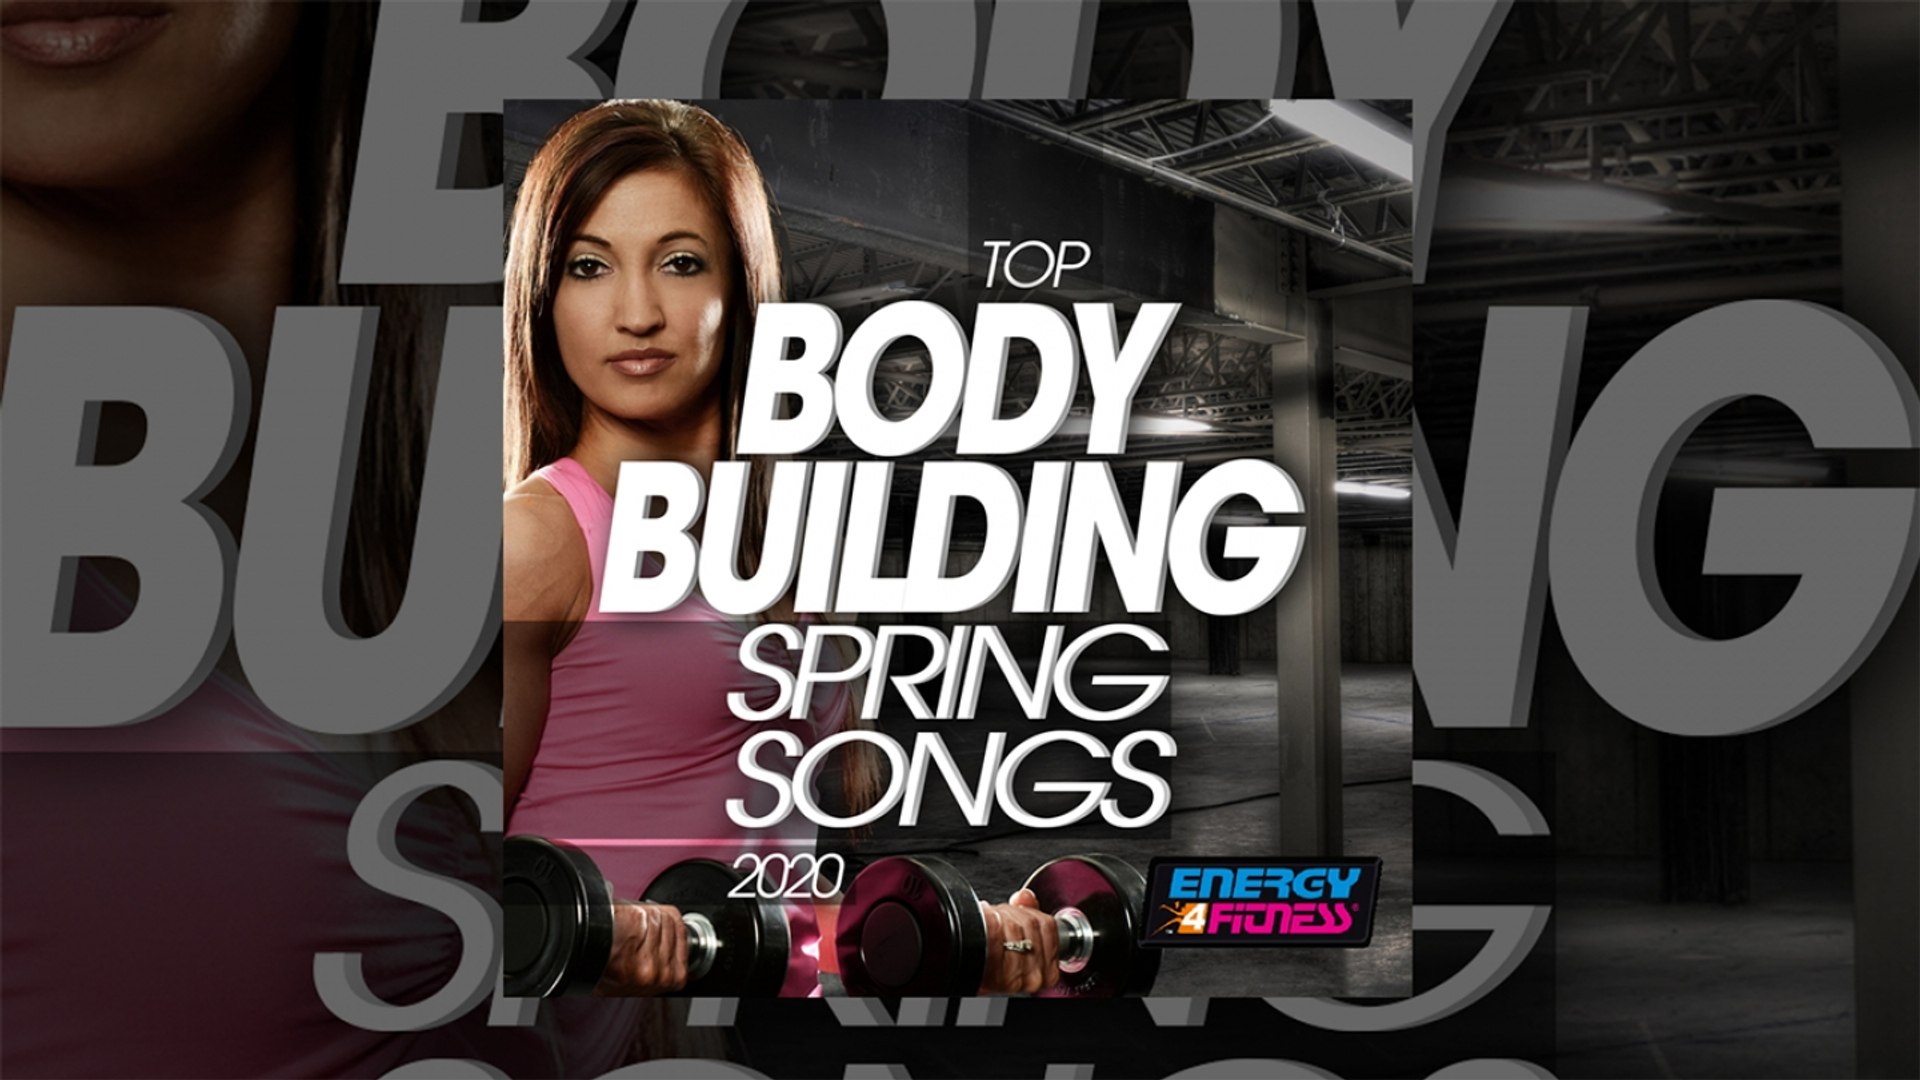 E4F - Top Body Building Spring Songs 2020 - Fitness & Music 2020